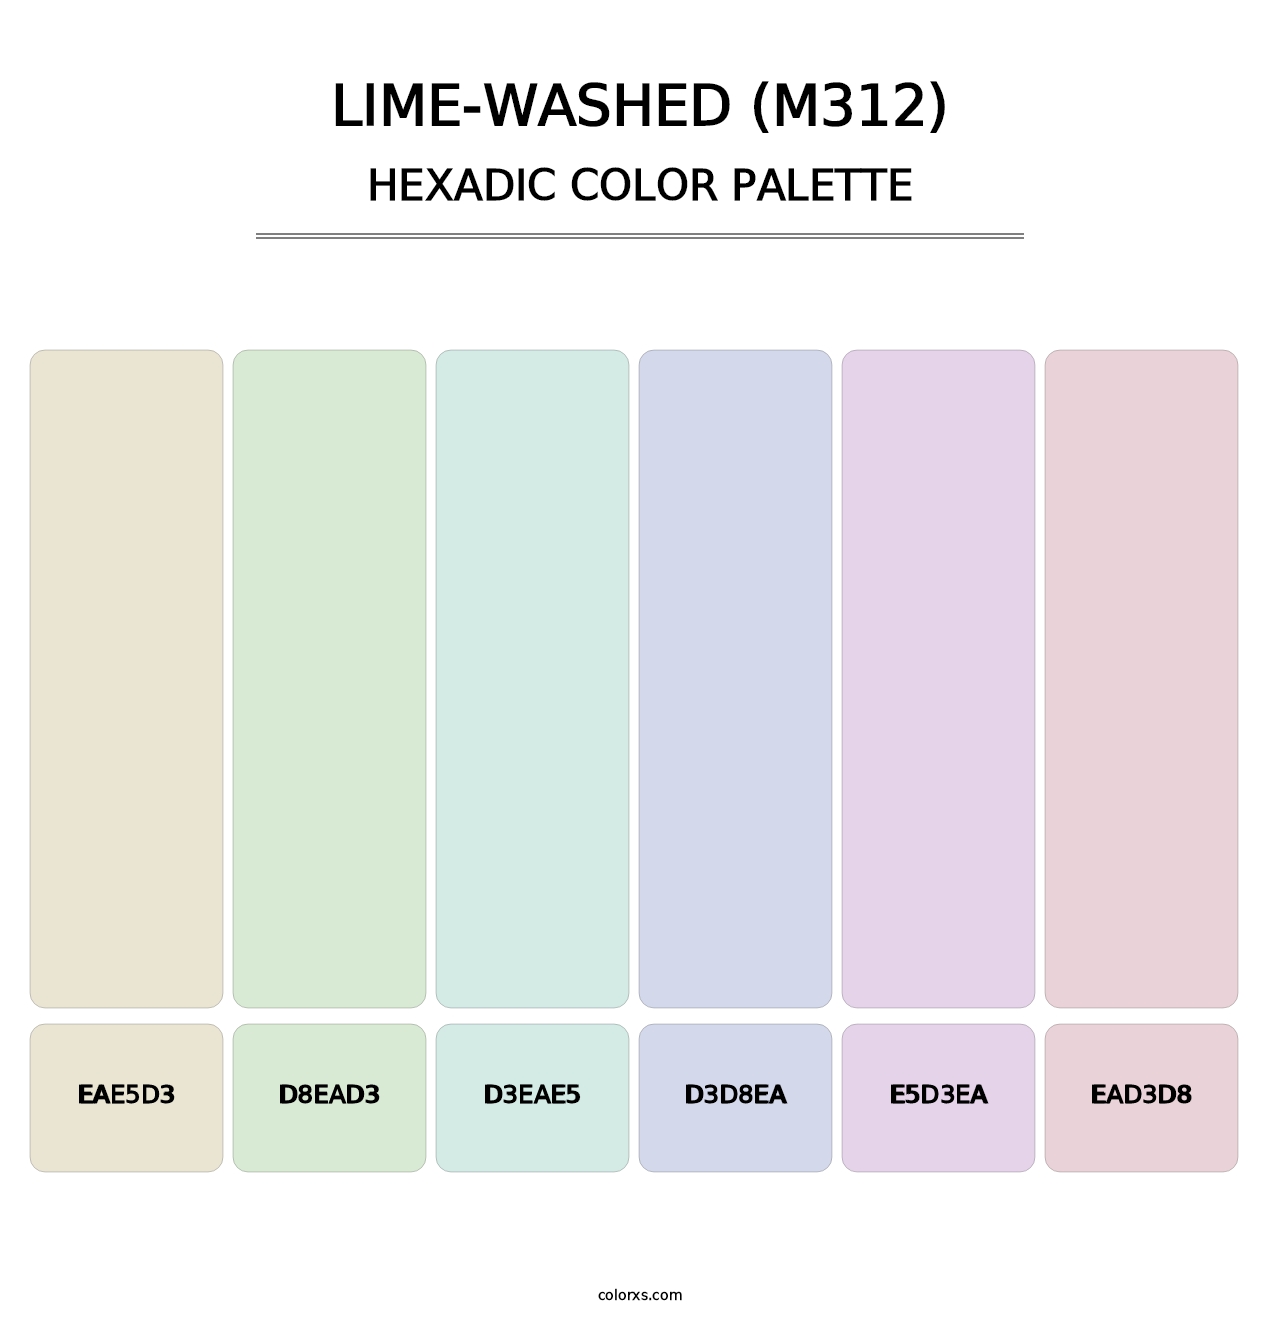 Lime-Washed (M312) - Hexadic Color Palette